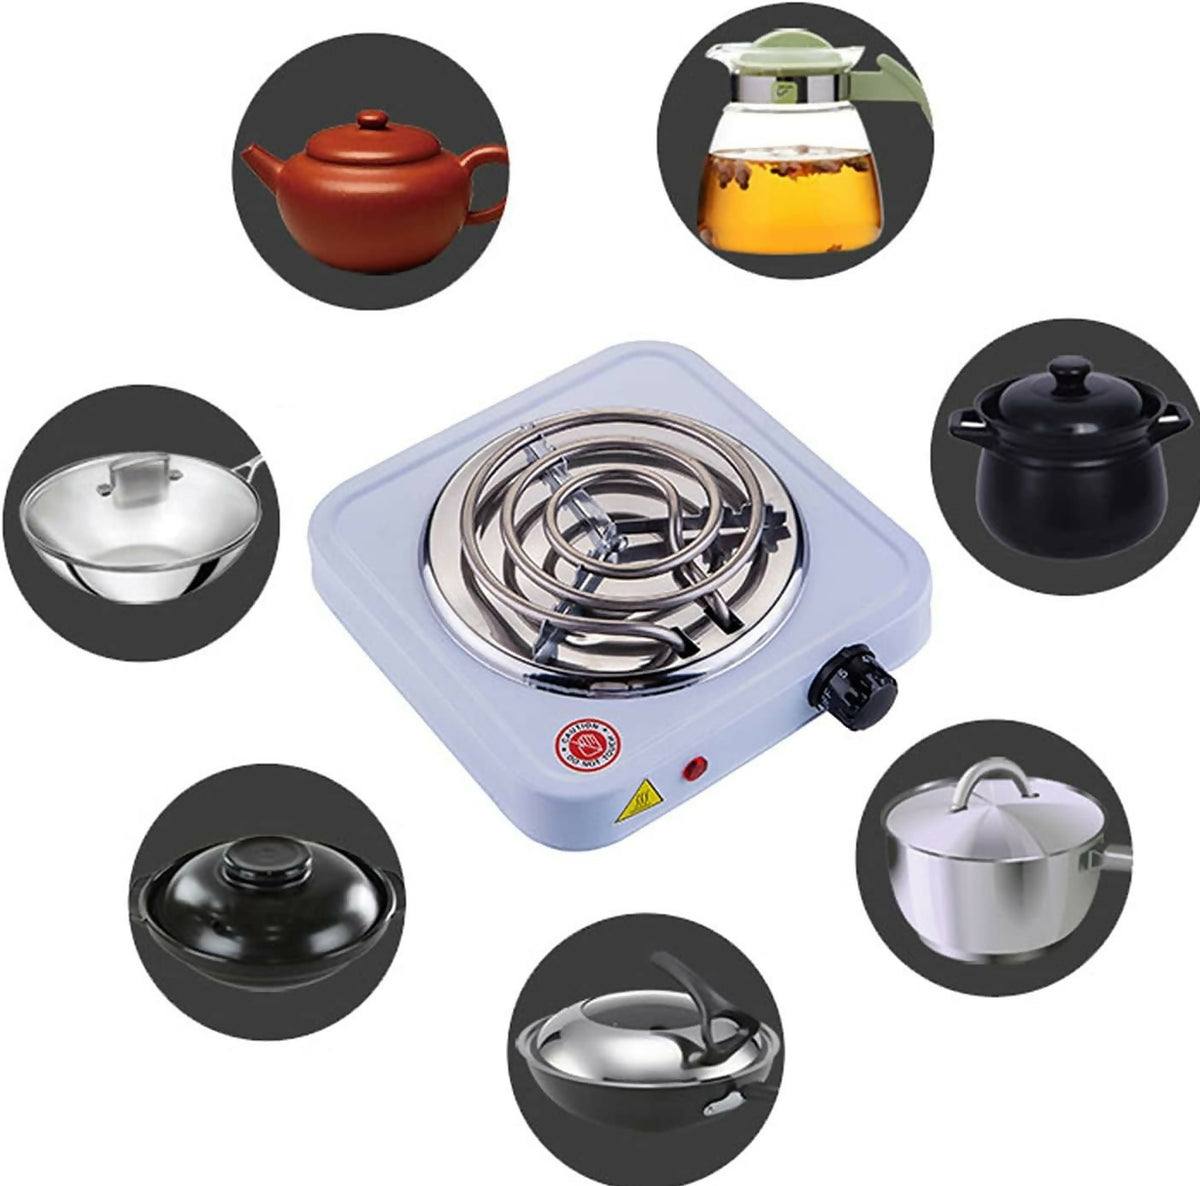 Electric Stove for cooking, Hot Plate heat up in just 2 mins, Easy to clean, 1000W, Automatic - ValueBox